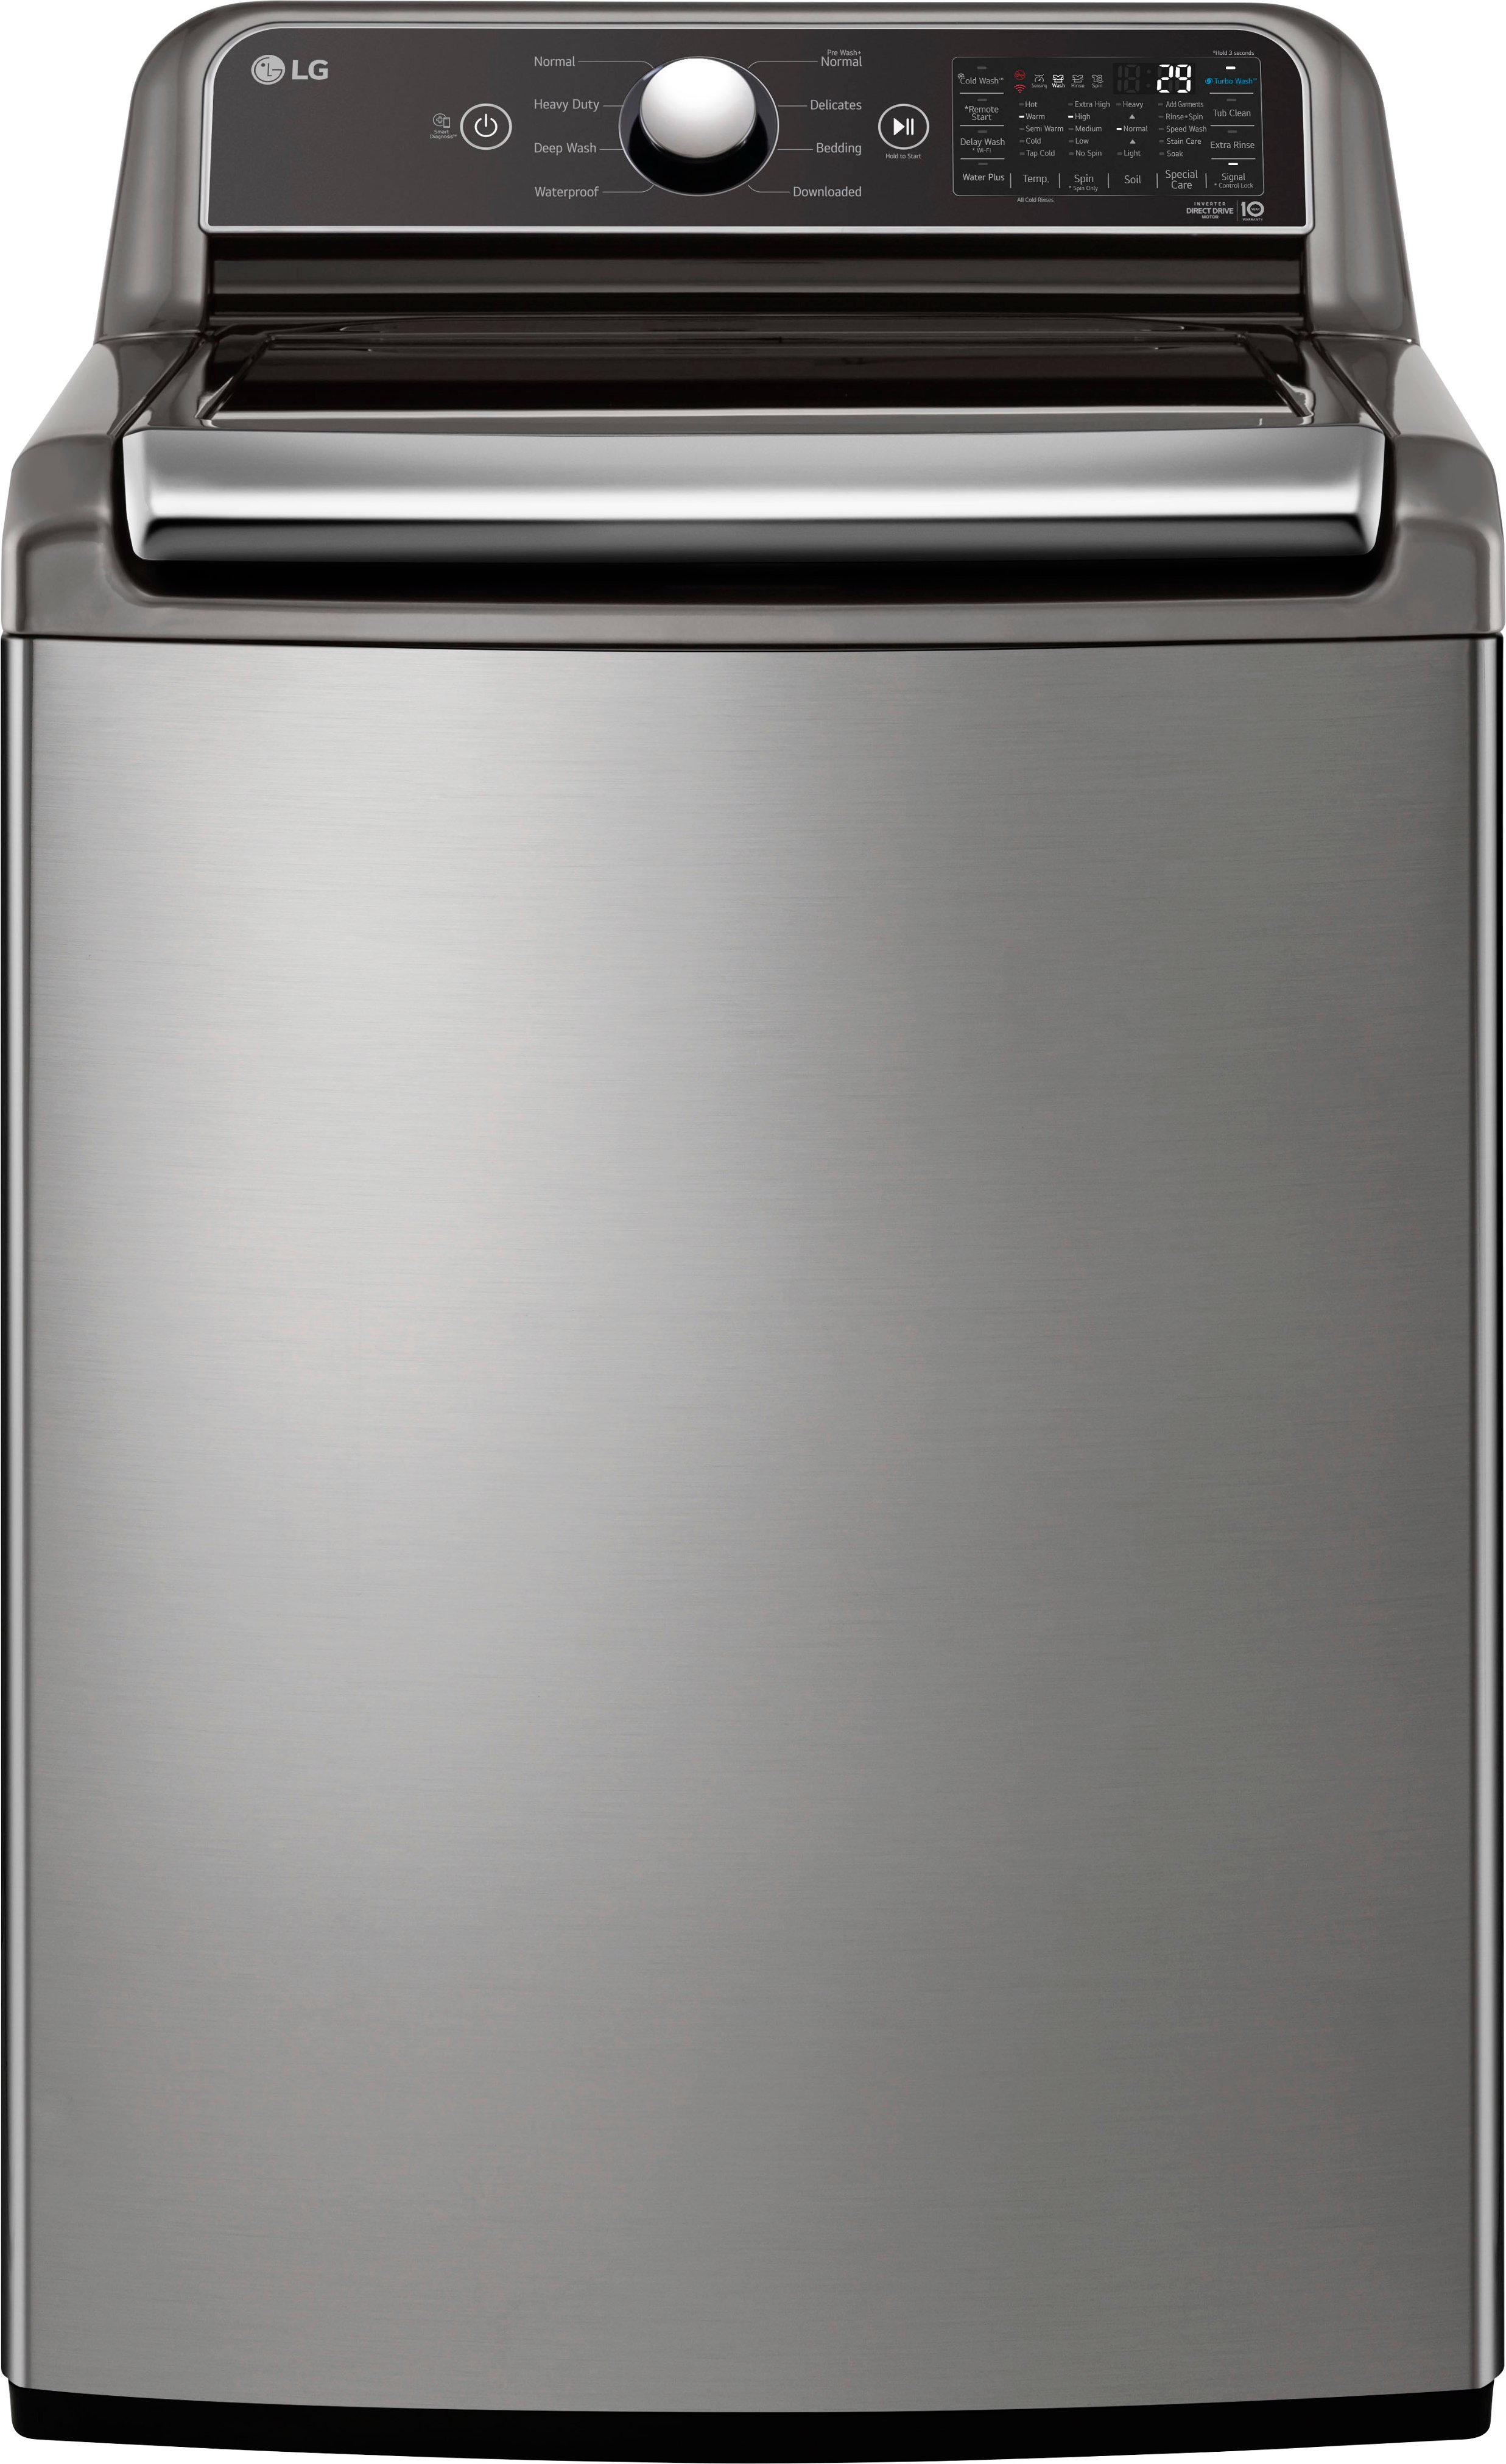 LG 5.5 Cu. Ft. High-Efficiency Smart Top Load Washer with TurboWash3D  Technology Graphite Steel WT7800CV - Best Buy